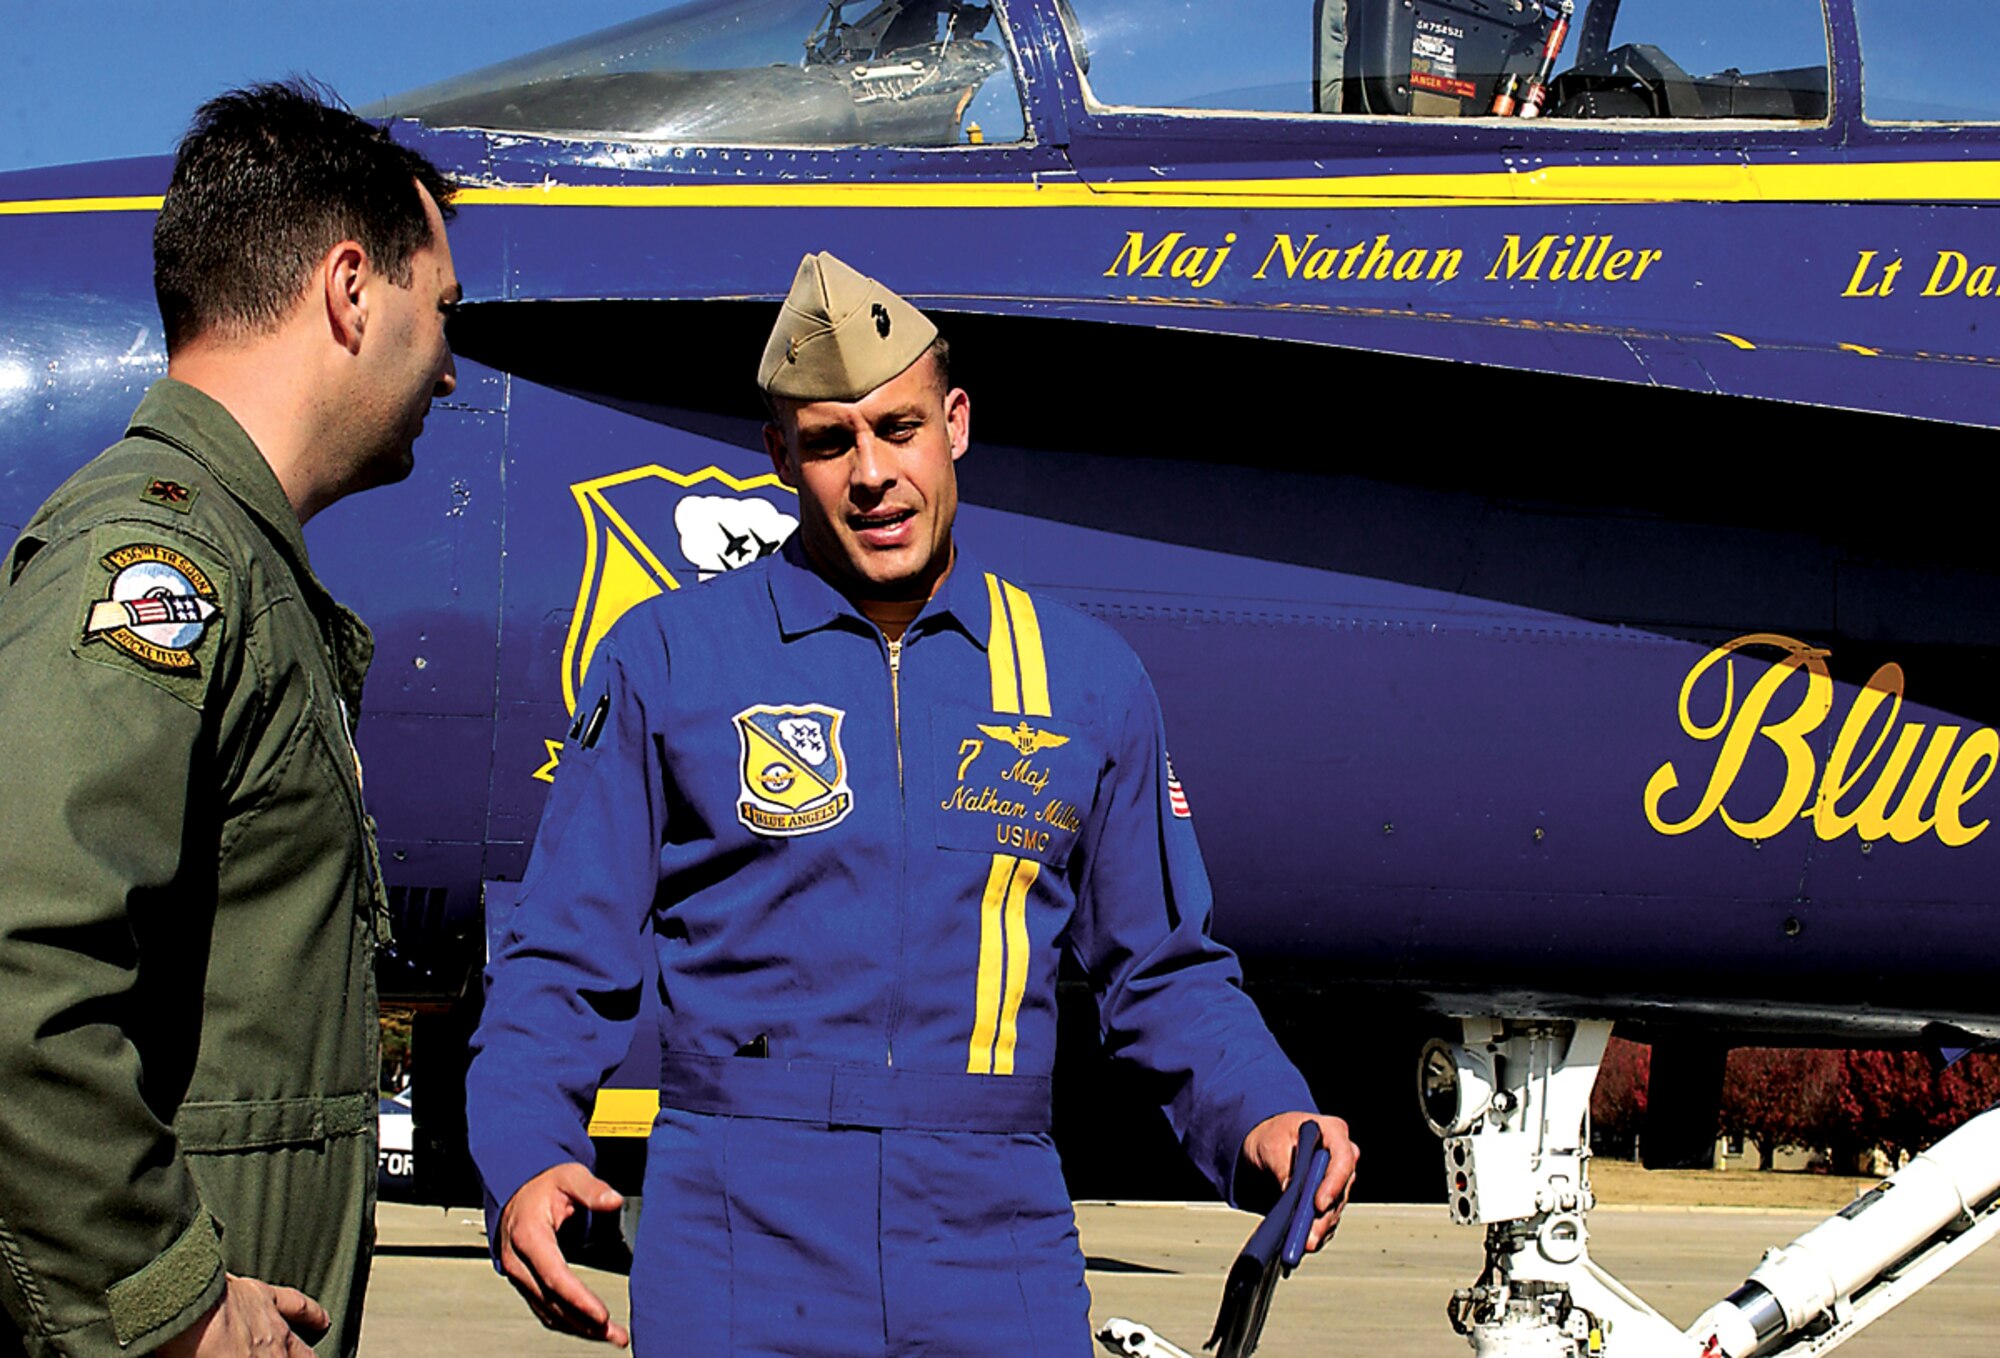 SEYMOUR JOHNSON AIR FORCE BASE, N.C. - Major Jeff D?Ambra, 336th Fighter Squadron Liaison for Blue Angels, welcomes #7 Navy Maj. Nathan Miller, Air Show narrator for the Aerial Demonstration Team Blue Angels, during a site visit of the base. The site visit is one of the final steps in the decision-making process for the Blue Angels choosing which bases to add to the team?s 2007 air show calendar. Major Miller and team?s event coordinator #8 Navy Lt. Dan McShane spent the day with air show committee members gathering information and visiting base facilities. The official decision will be announced following the International Council of Air Shows conference next week. Airshows provide an opportunity for the public to get an up-close look at America?s air power.  (U.S. Air Force photo by Staff Sgt. Les Waters)                               